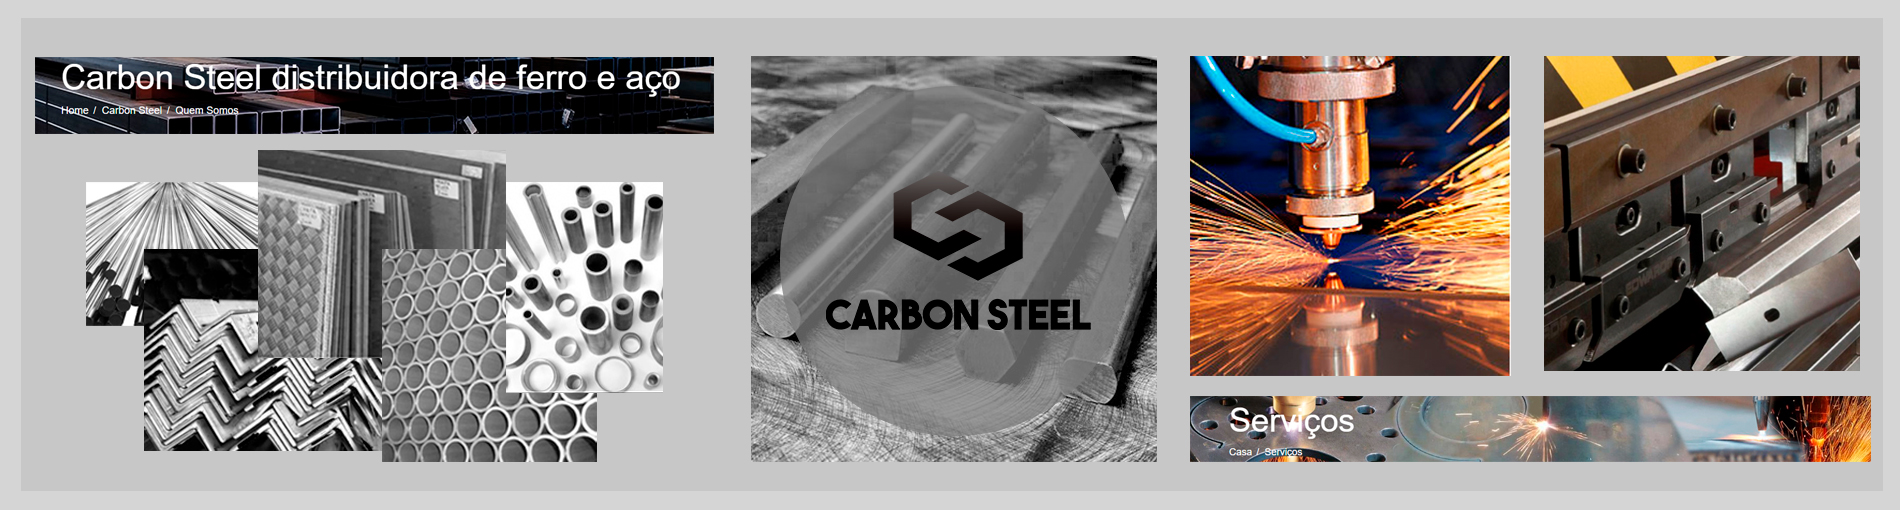 Carbon Stell